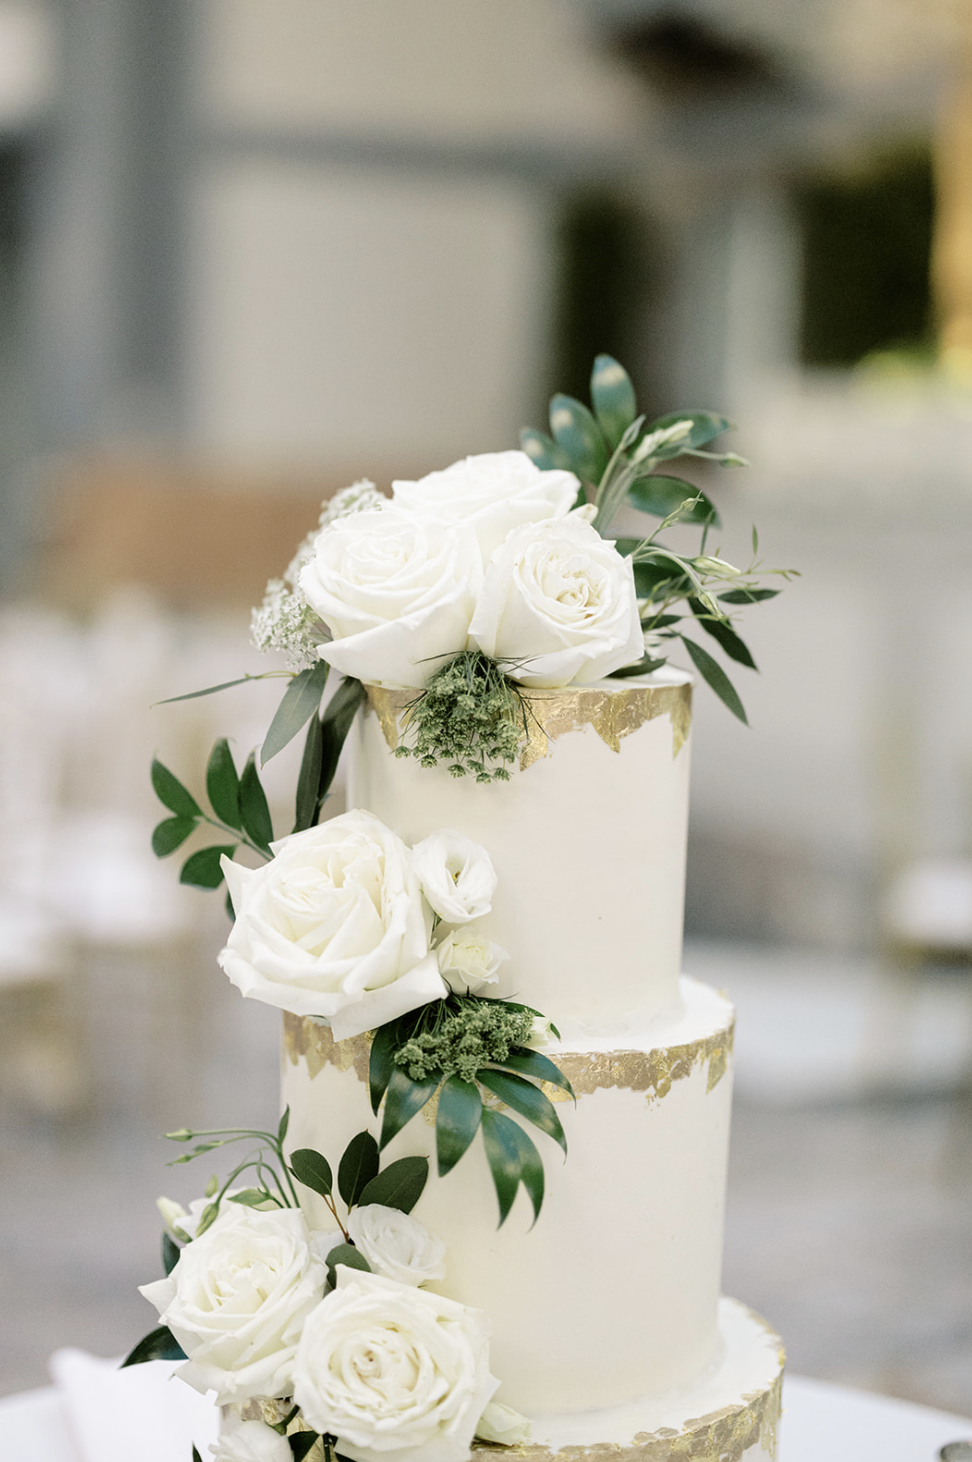 Three tier white wedding cake with gold foil outline and white roses with greenery sit on cake table at Chicago wedding reception.